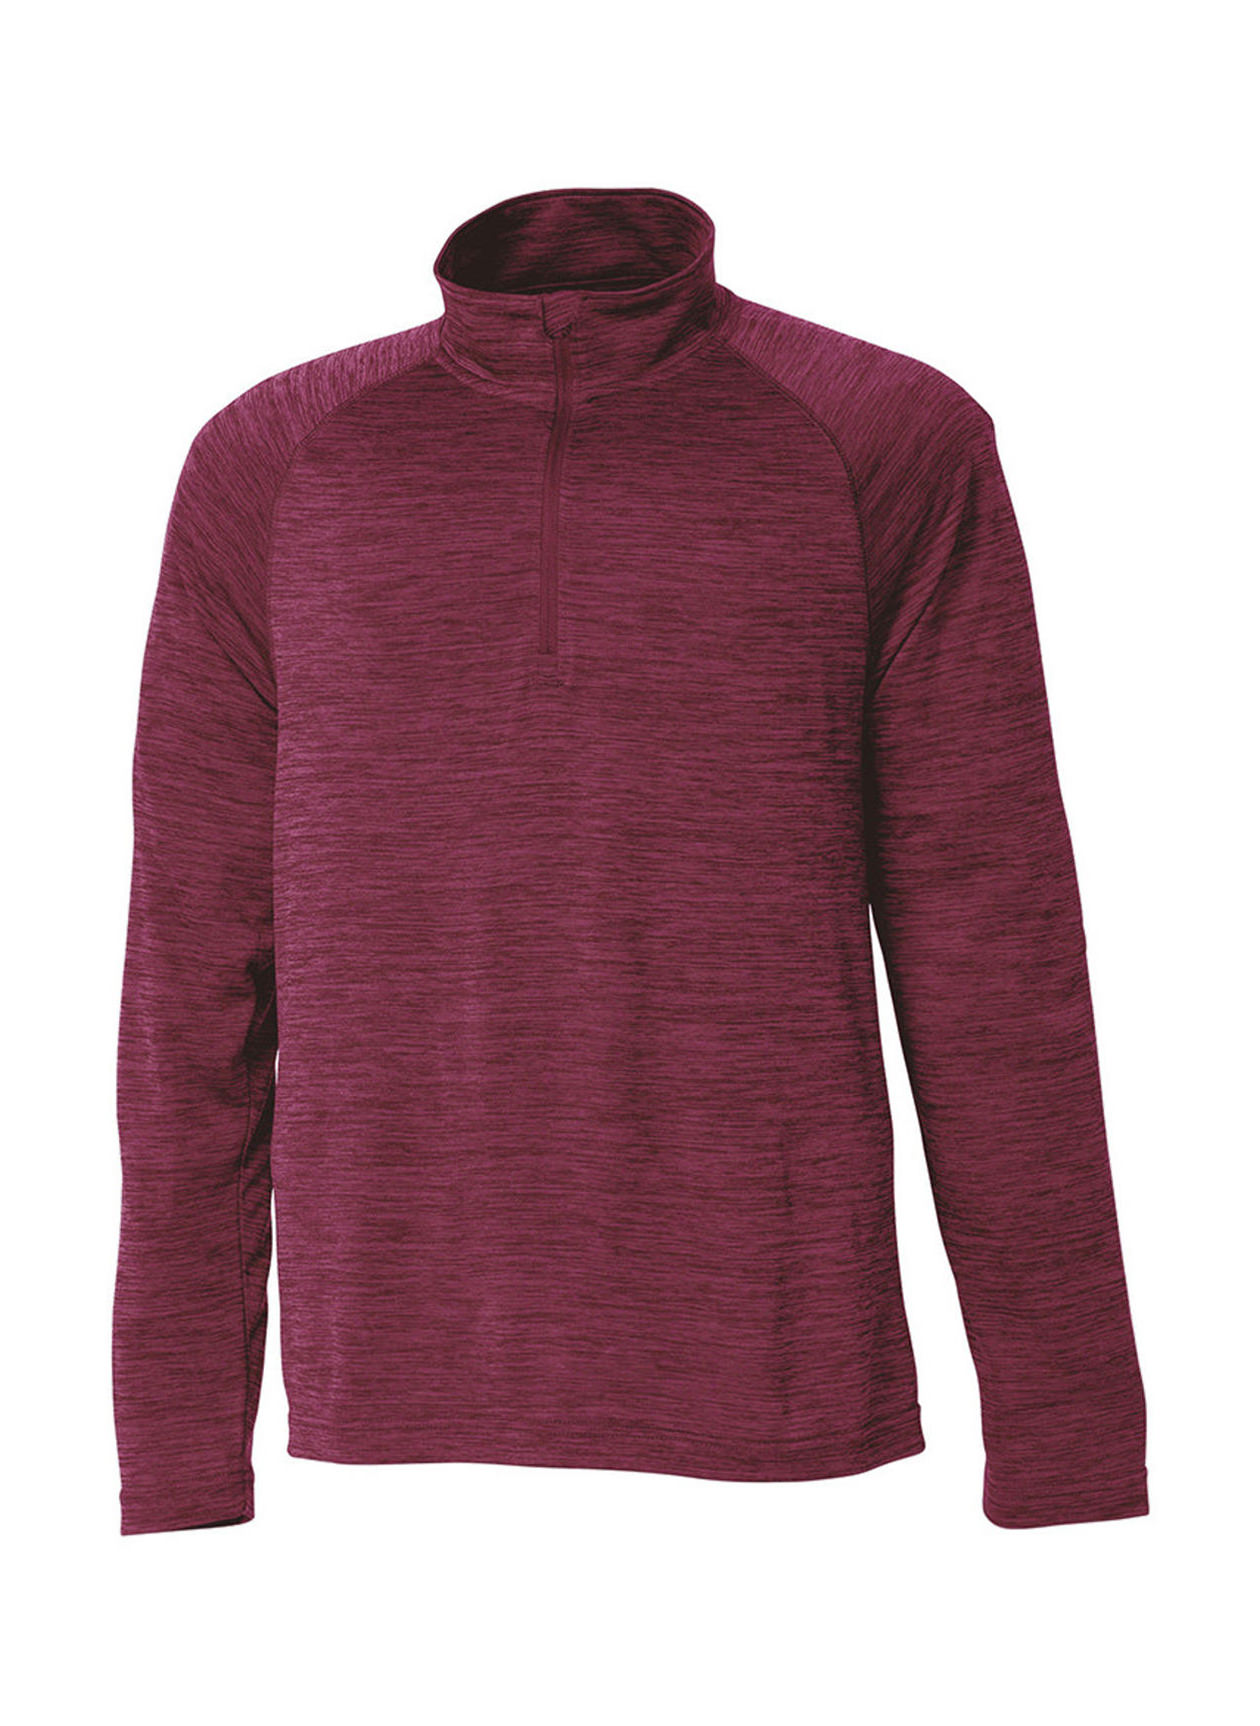 Charles River Men's Maroon Space Dyed Quarter-Zip